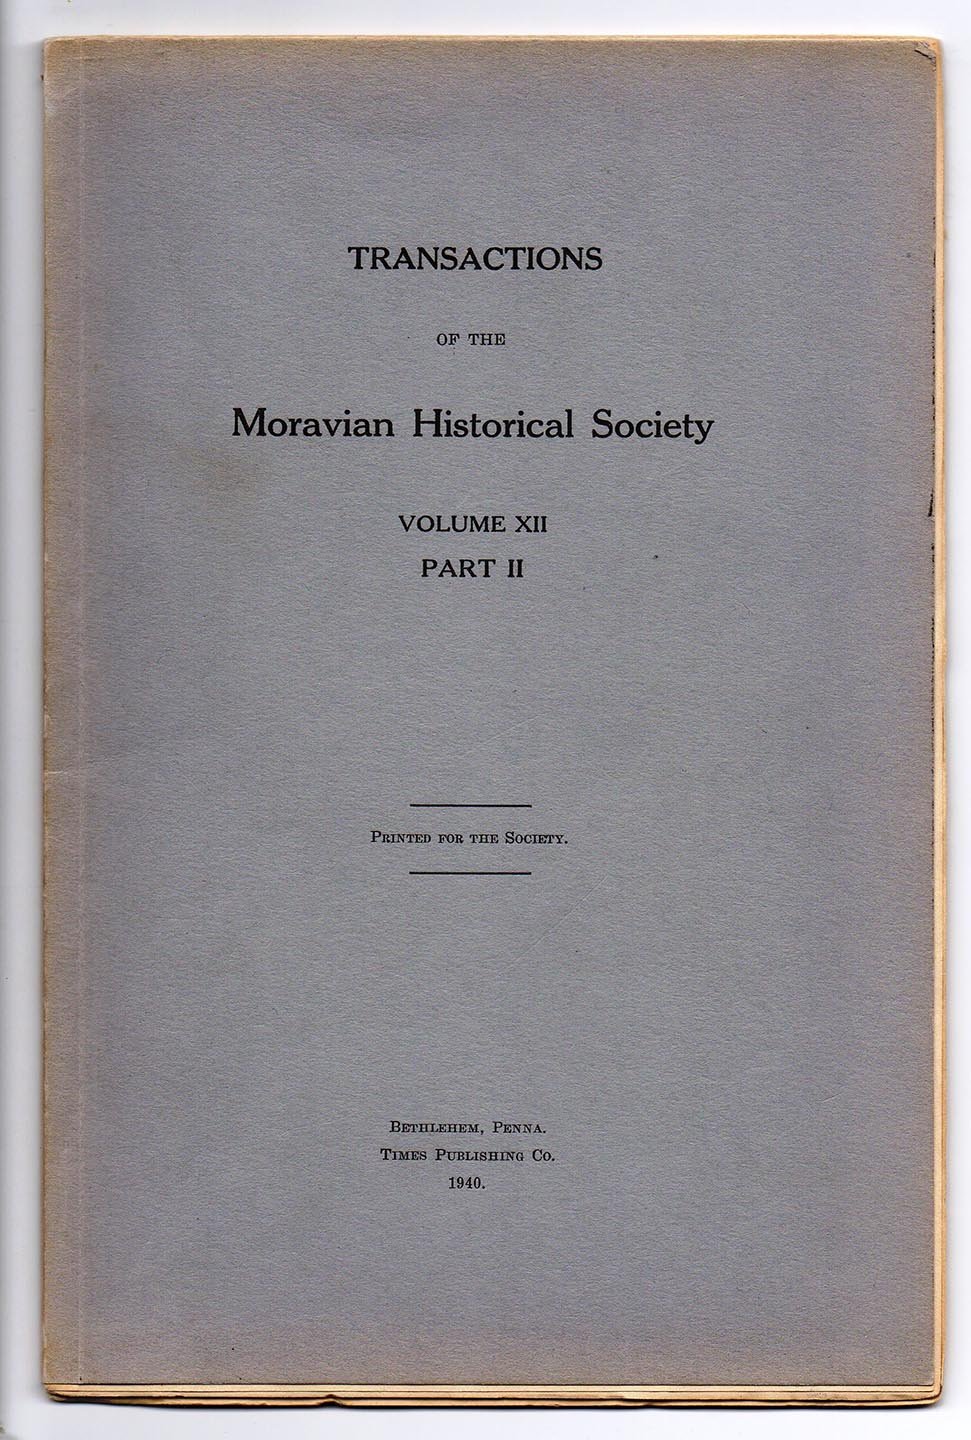 Transactions of the Moravian Historical Society Volume XII, Part II